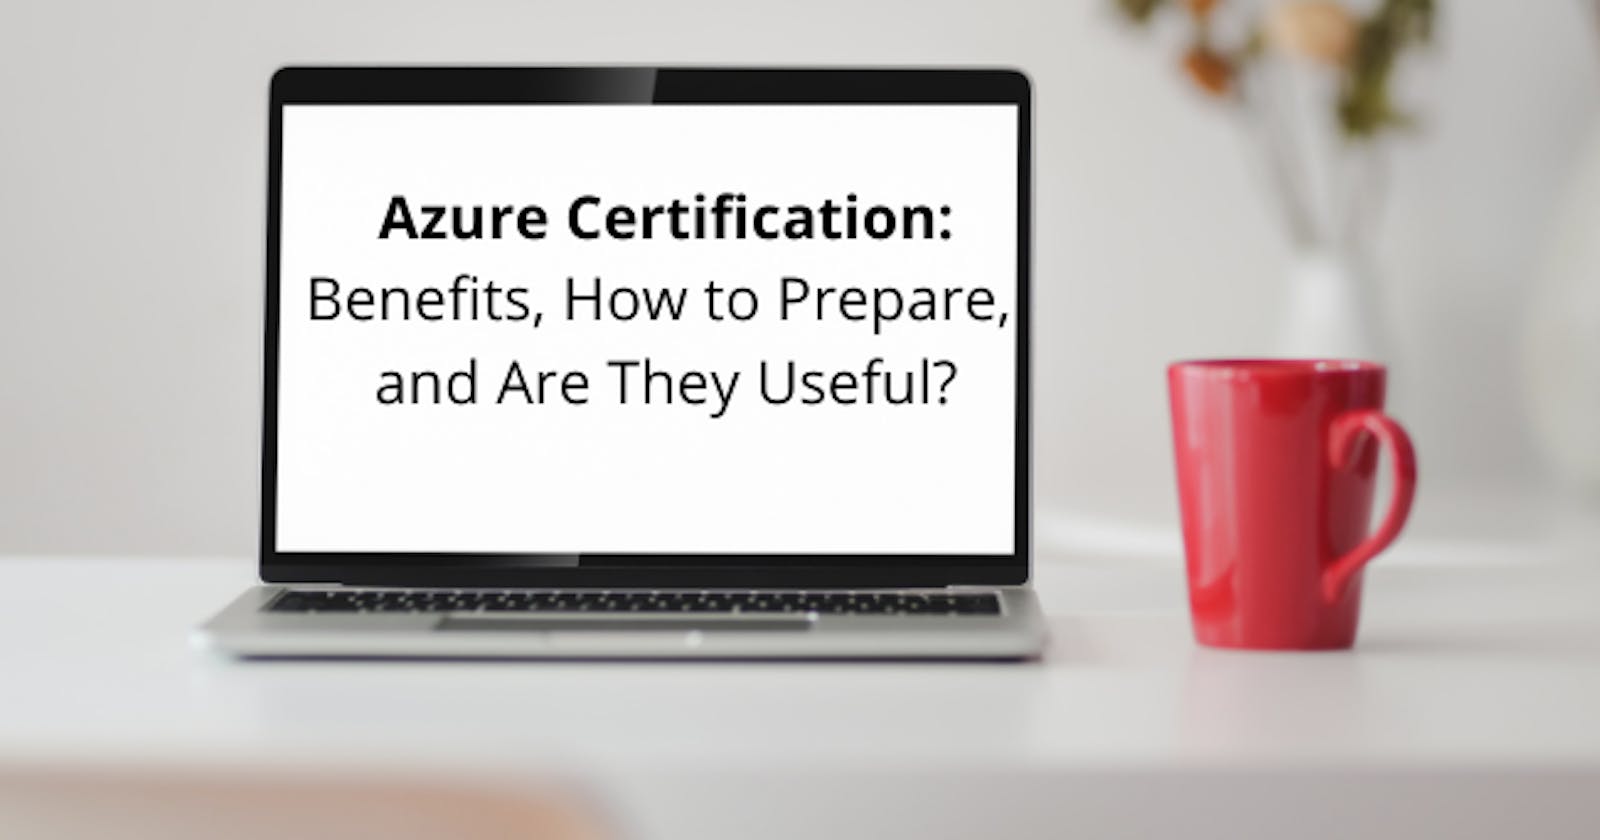 Azure Certification: Benefits, How to Prepare, and Are They Useful?